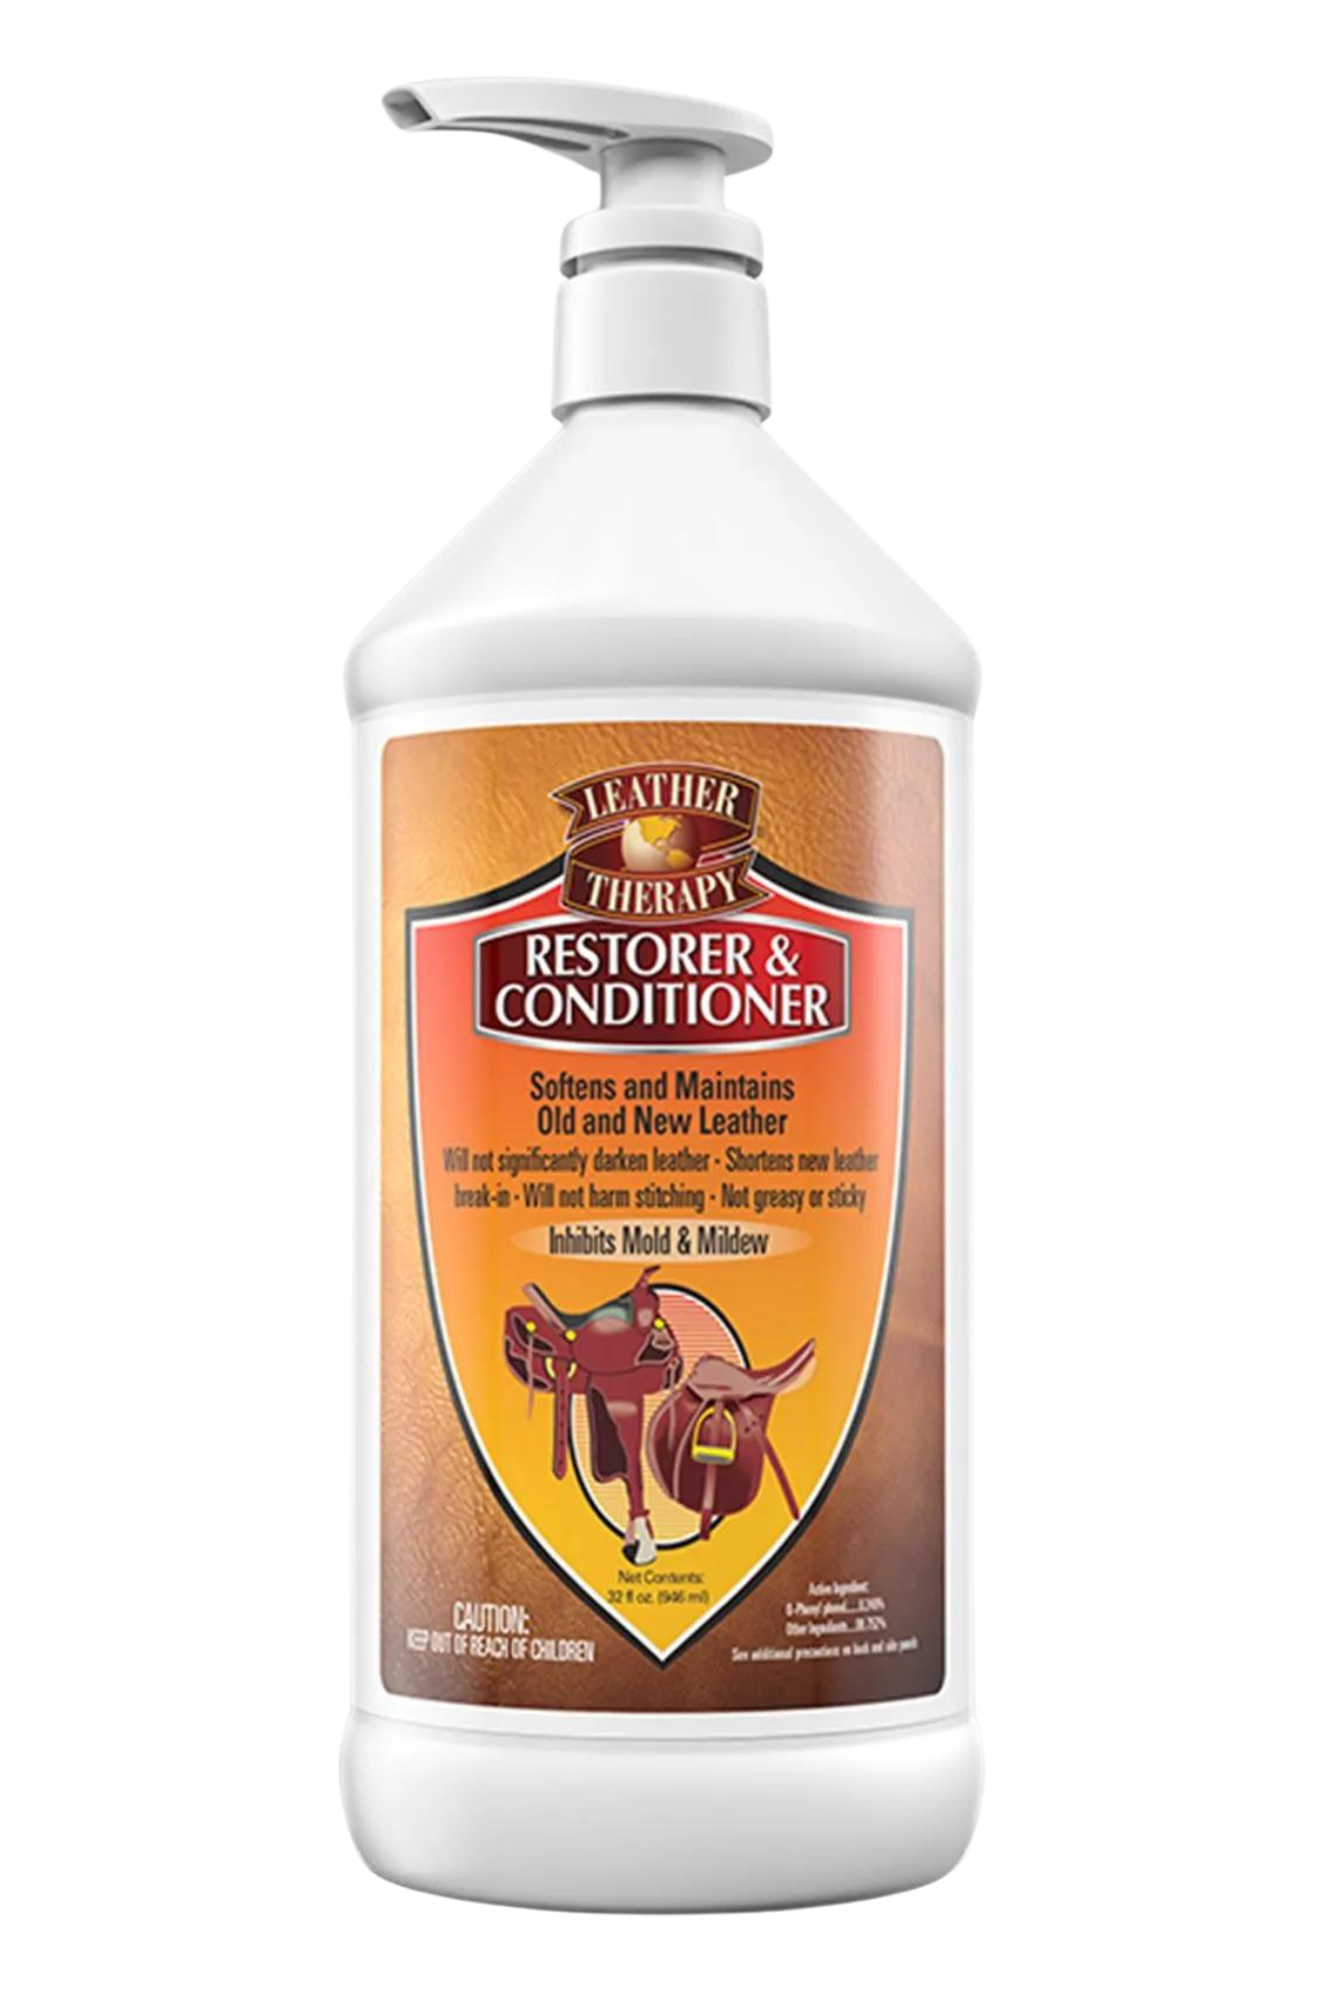 LEATHER THERAPY RESTORER & CONDITIONER